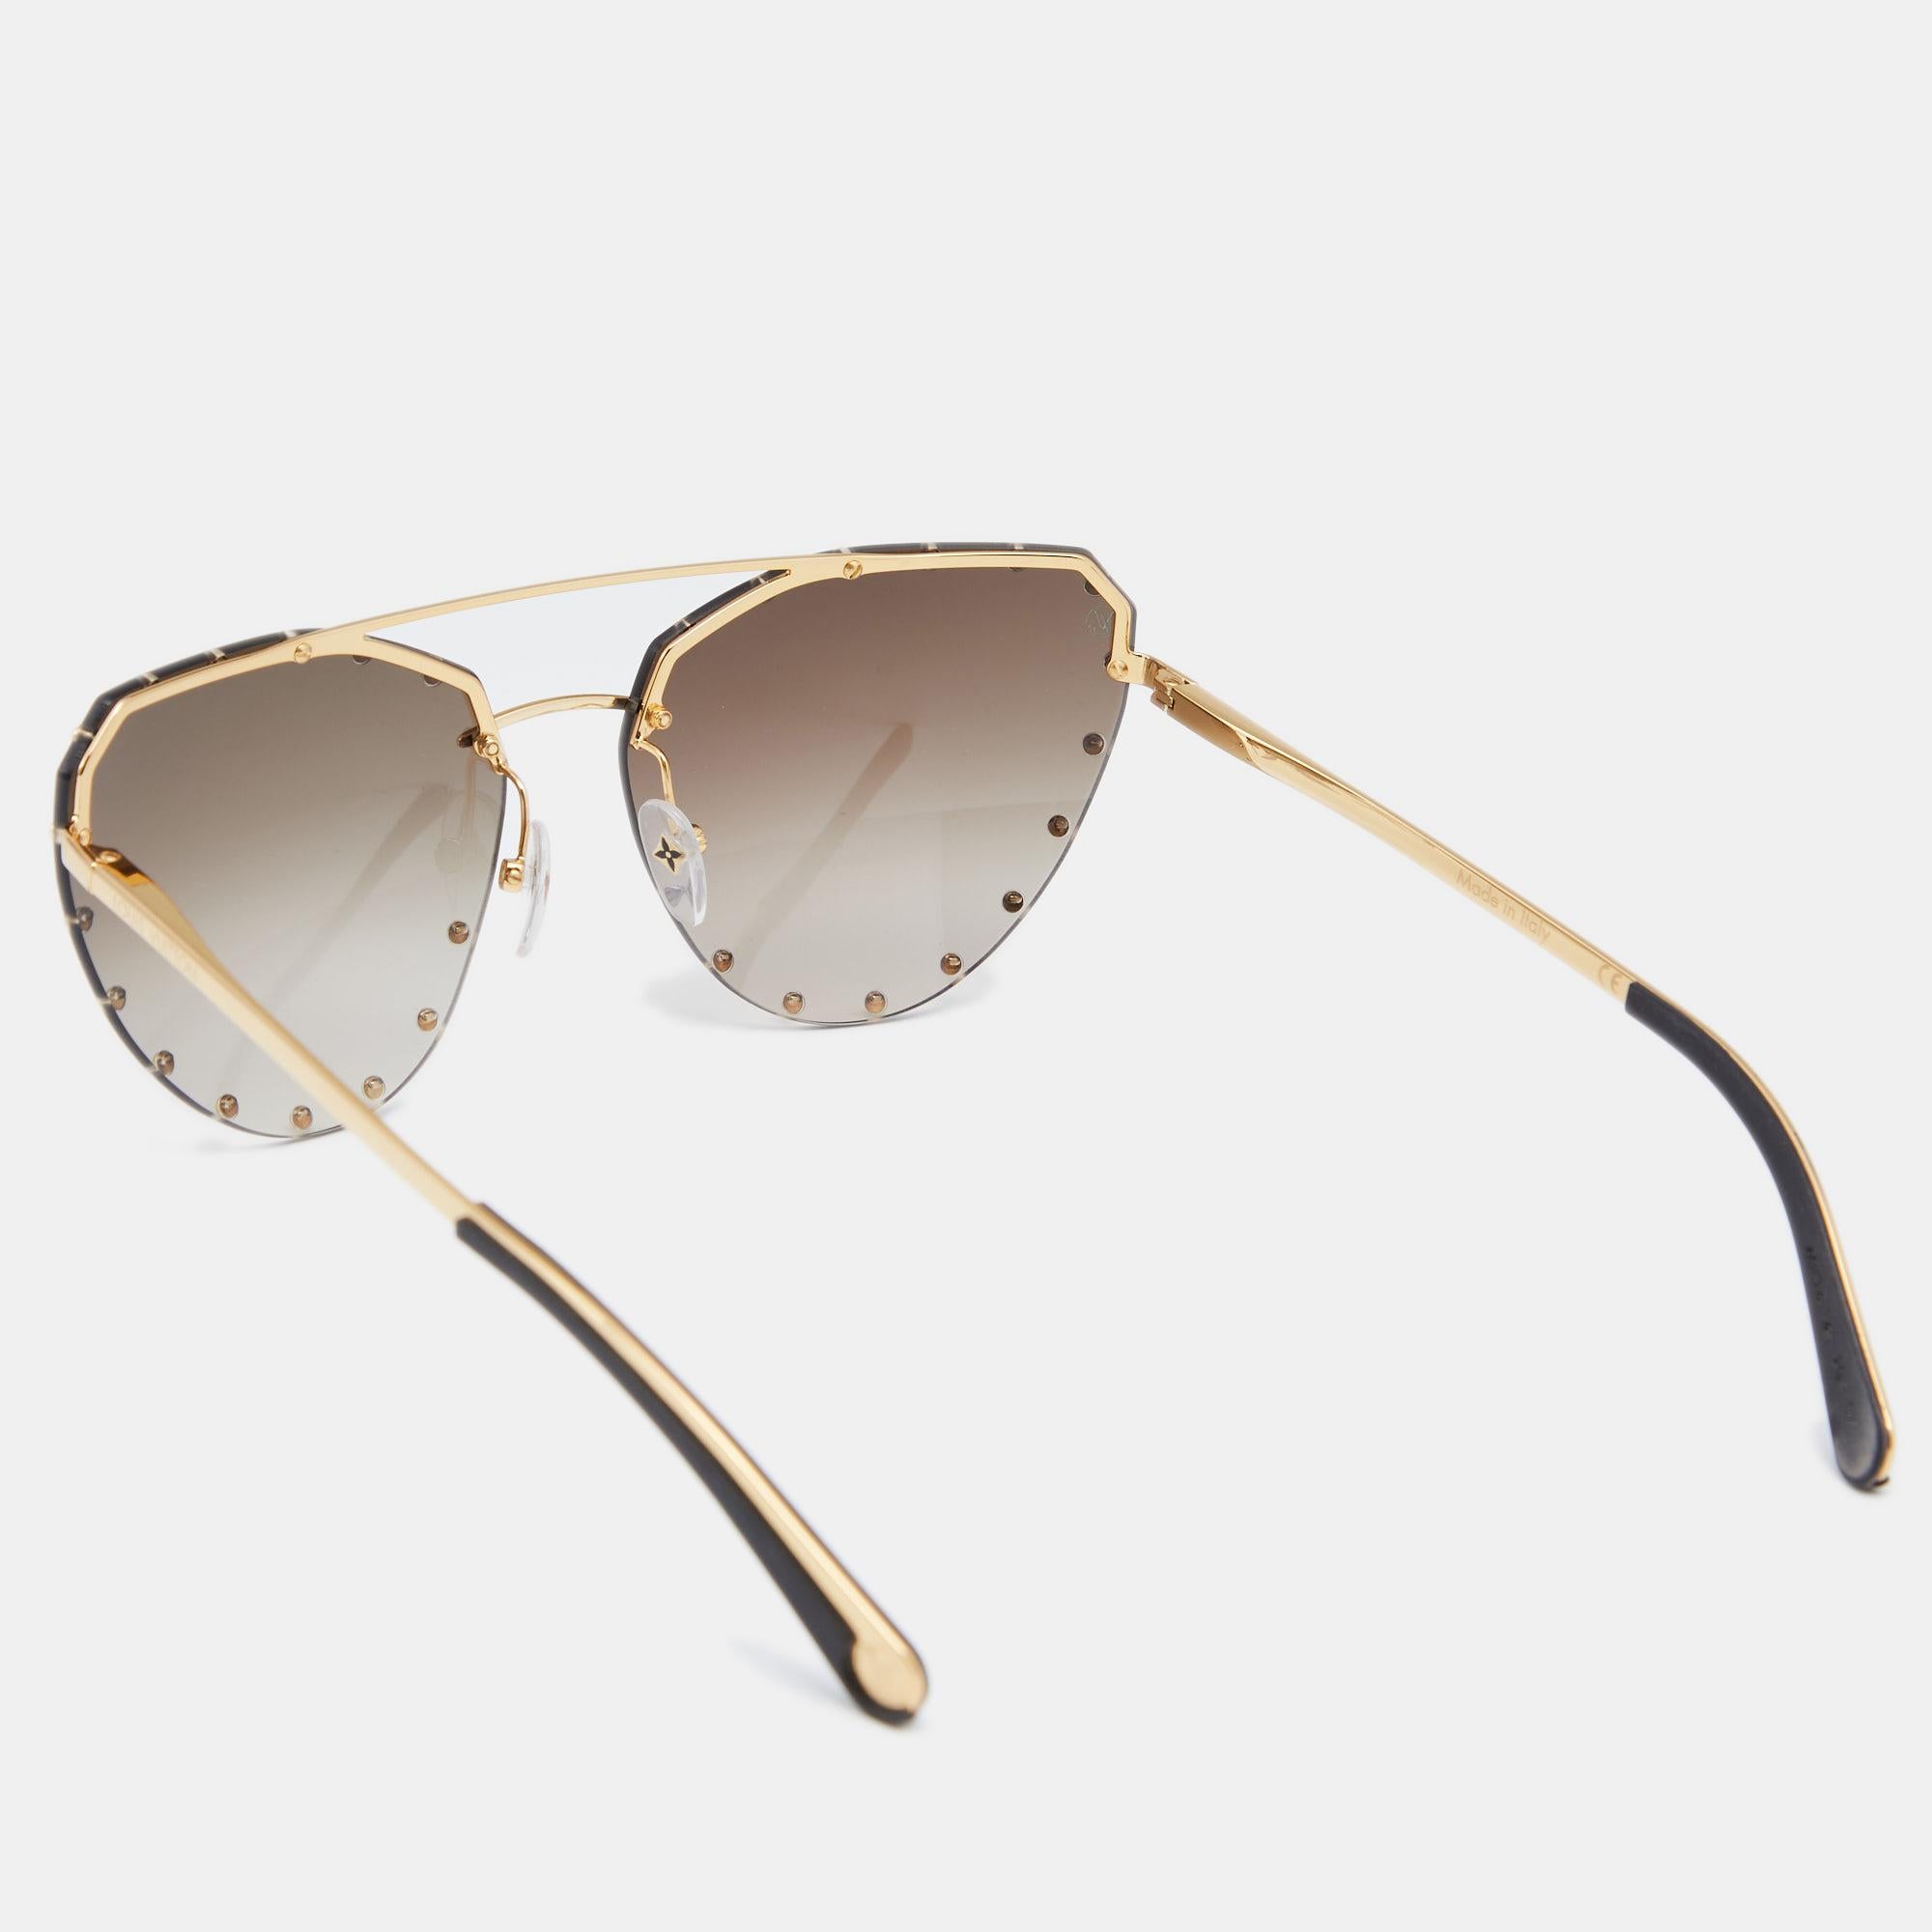 Add a statement finish to your look of the day with these Louis Vuitton The Party sunglasses. The design is set in a gold-tone metal frame, fitted with high-quality lenses, and adorned with LV-detailed studs.

Includes: Original Pouch, Original Case